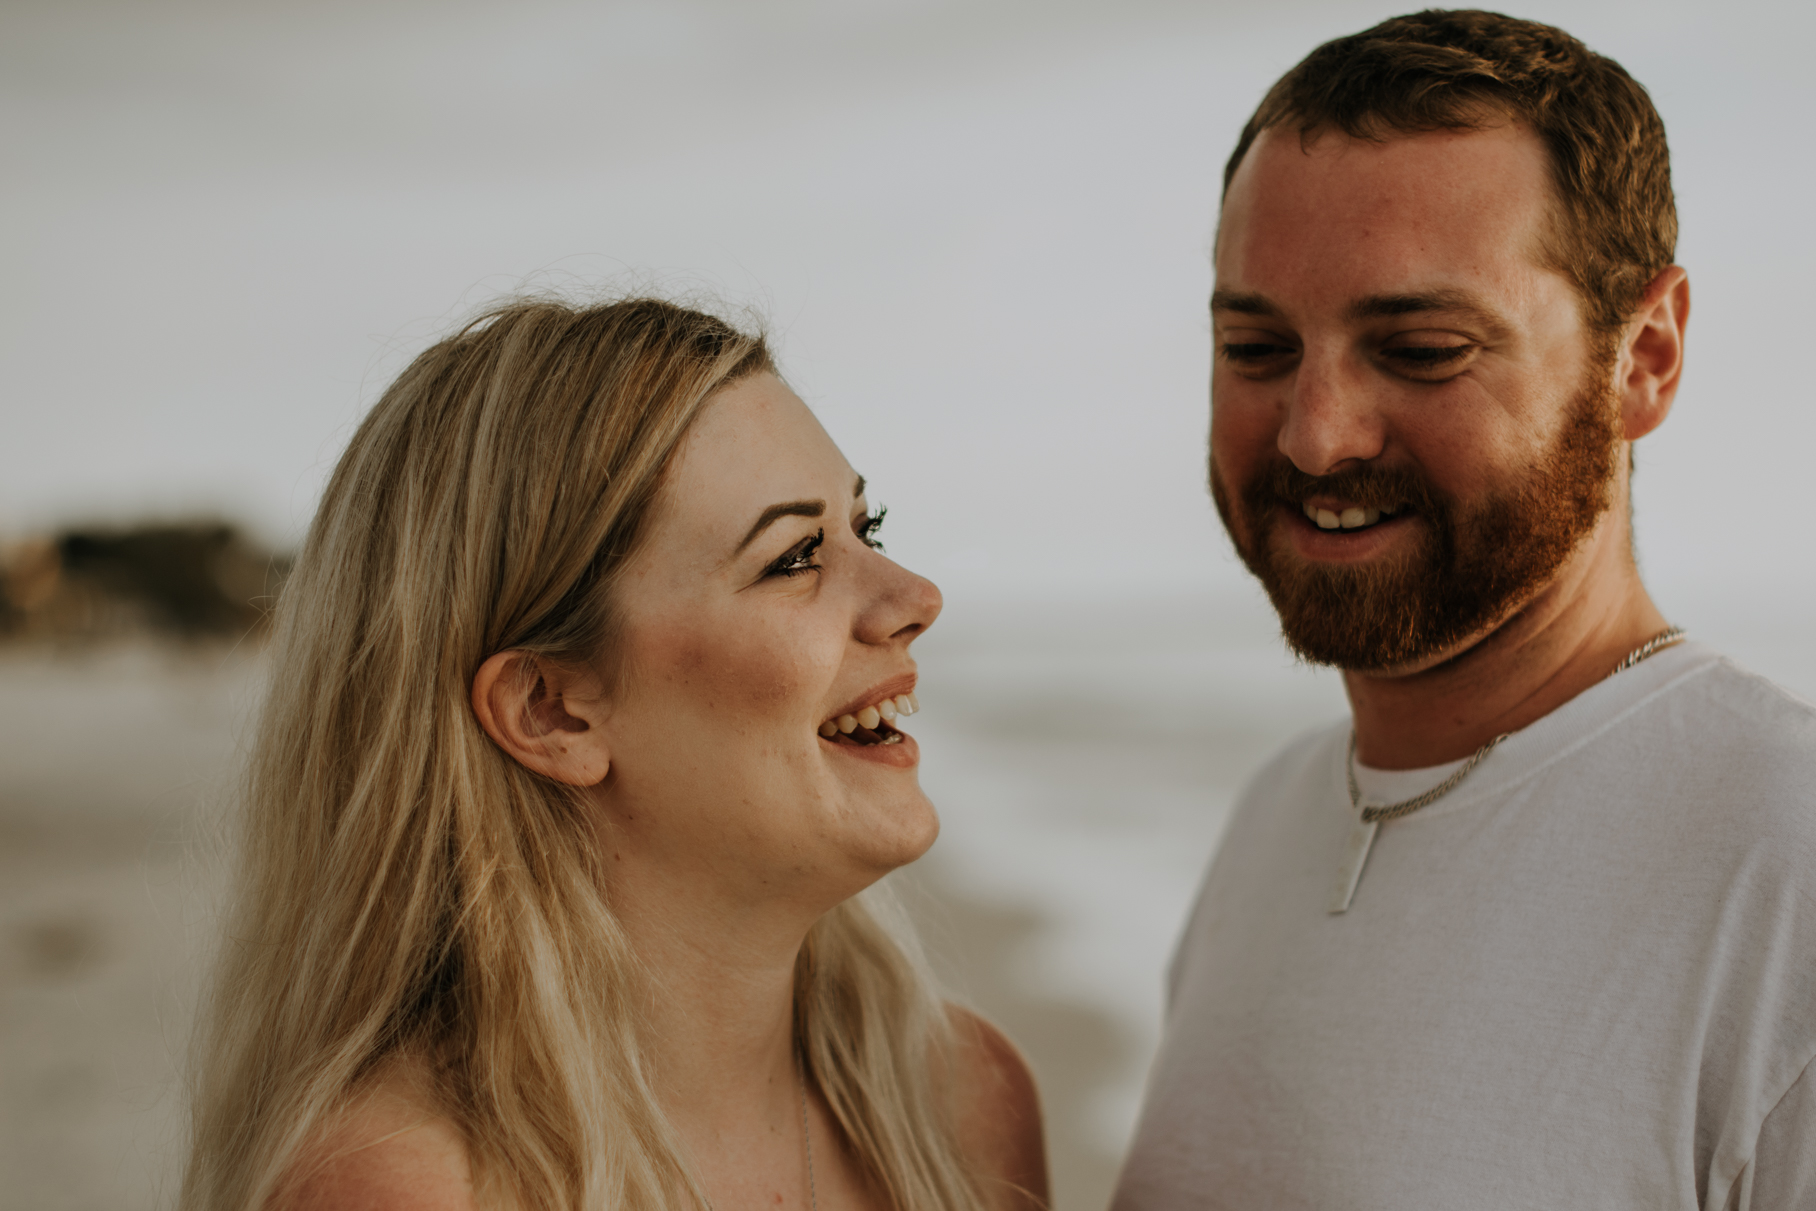 emily + brett | st pete beach engagement | freehearted film co | tampa wedding photography for freespirited lovers